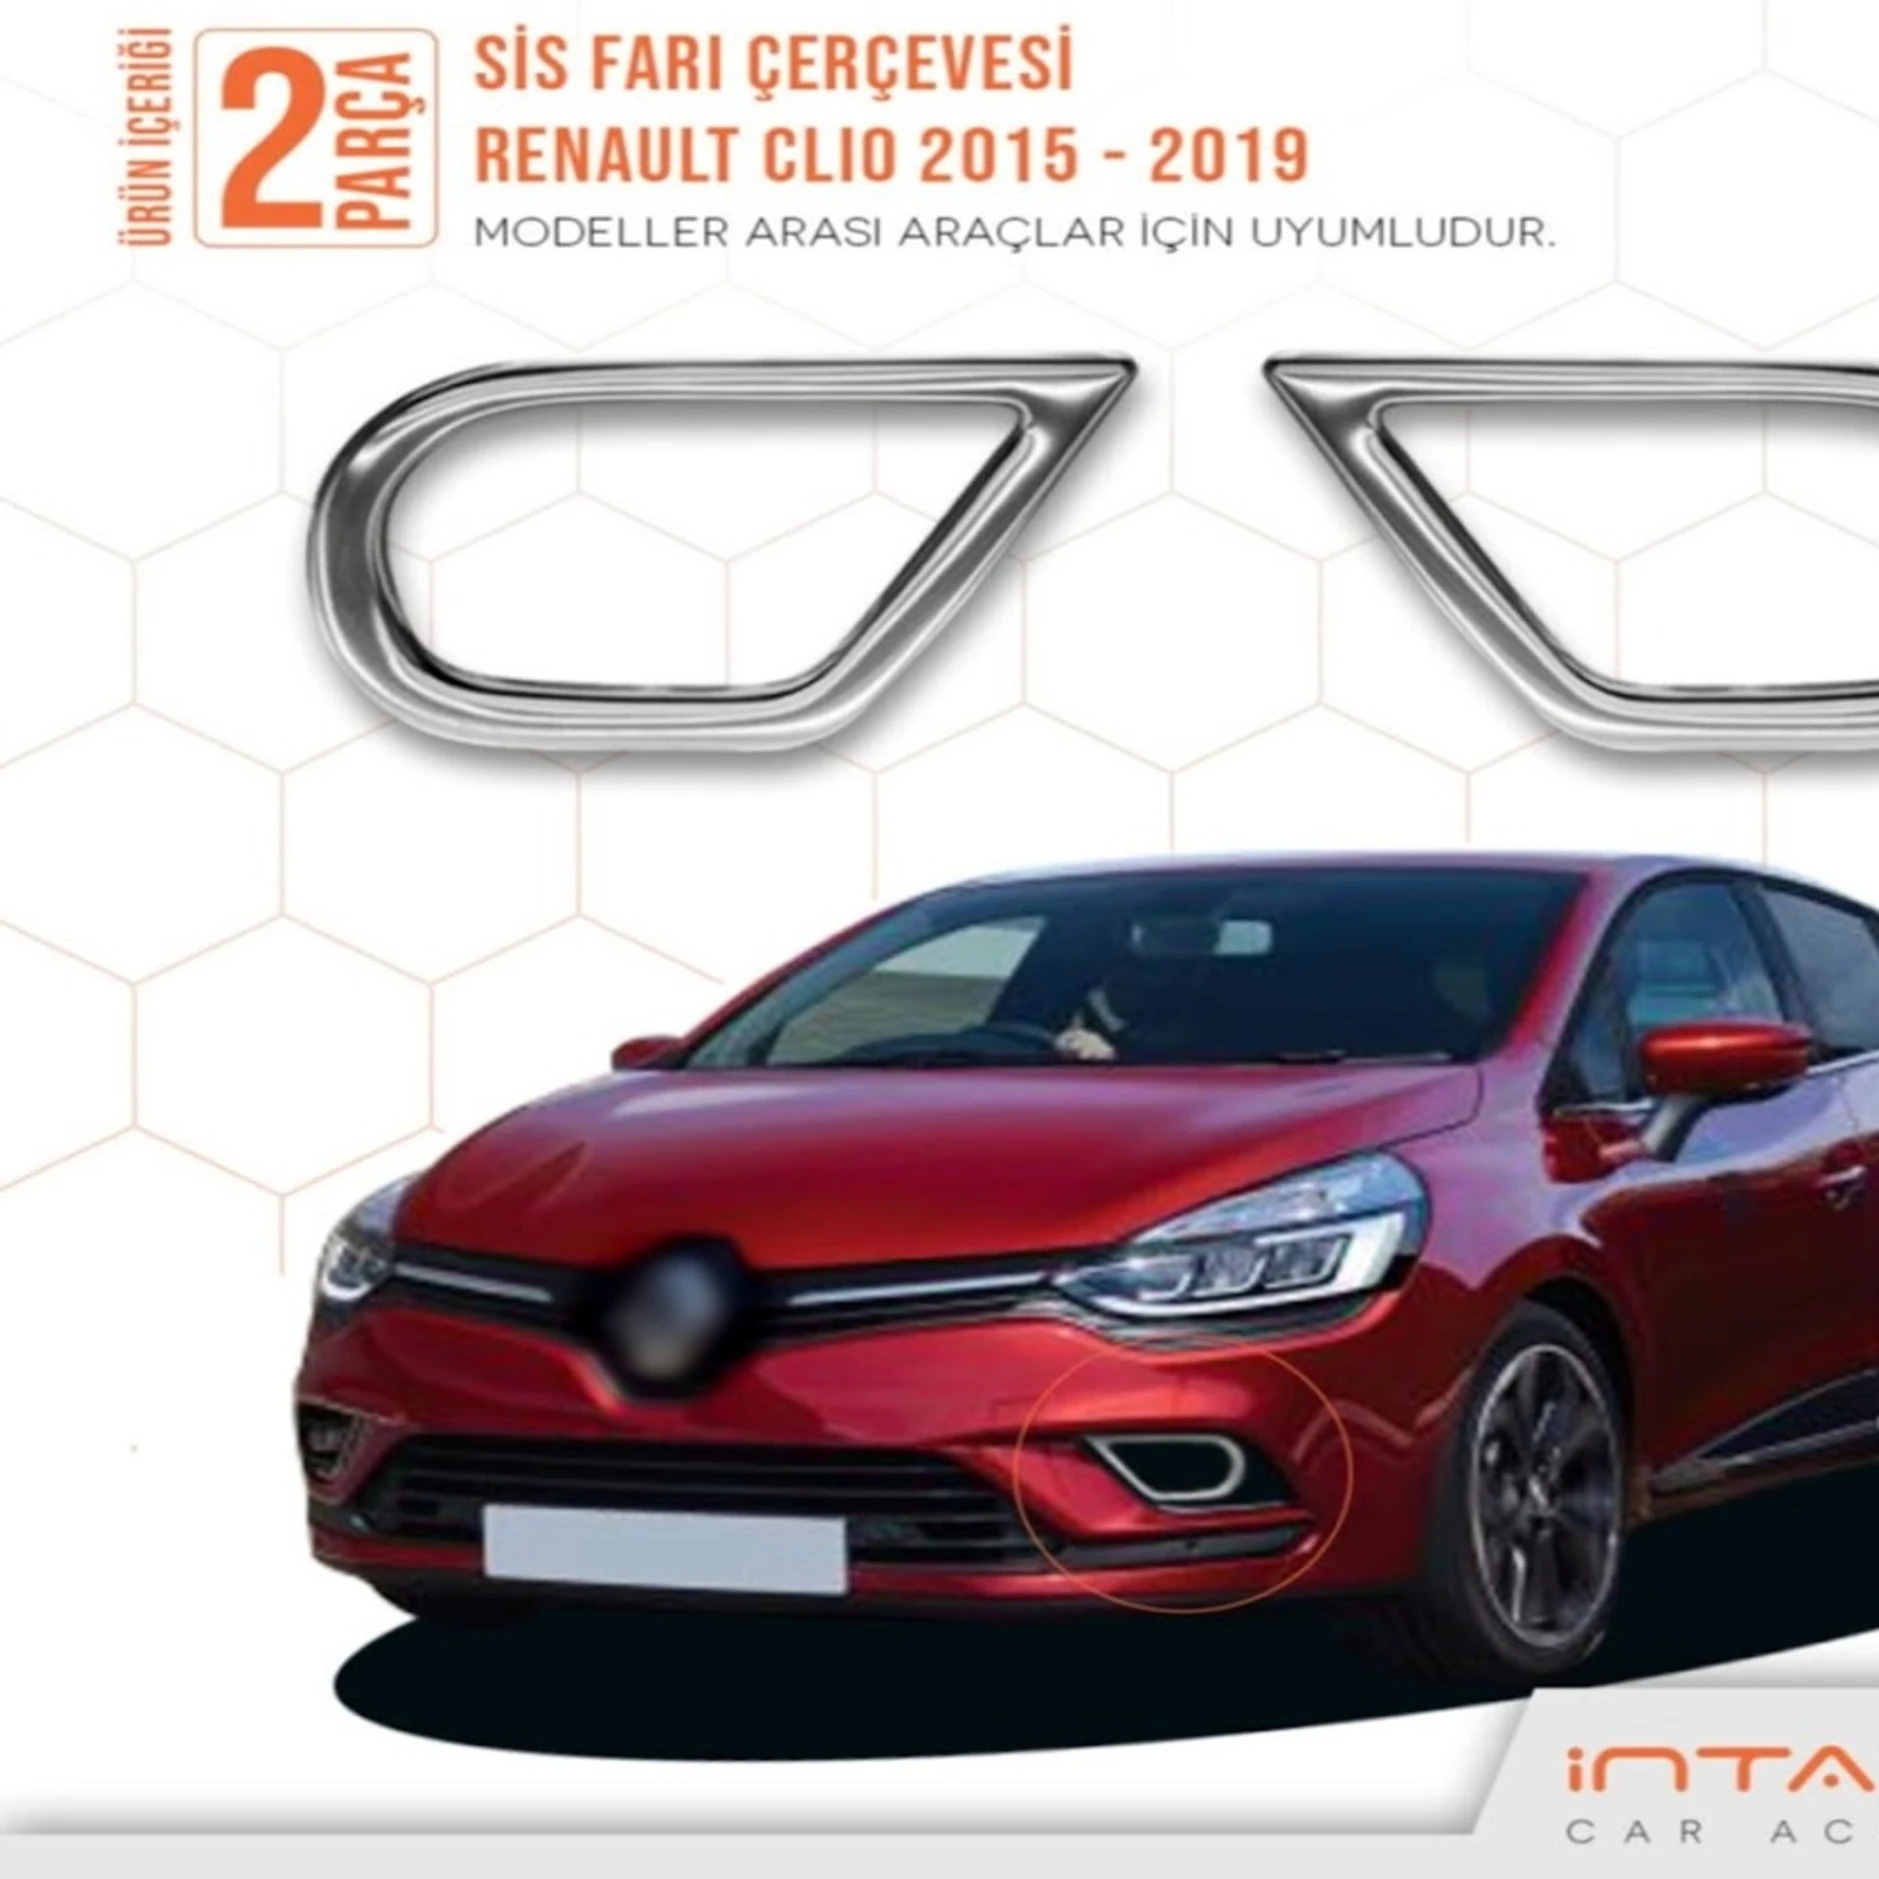 Lokken Wijden Portiek Free Shipping New Style High Quality Easy Montage Bright Chrome 2 Pieces  Front Fog Light Frame For Renault Clio 4 2015 2019|Aviation Parts &  Accessories| - AliExpress